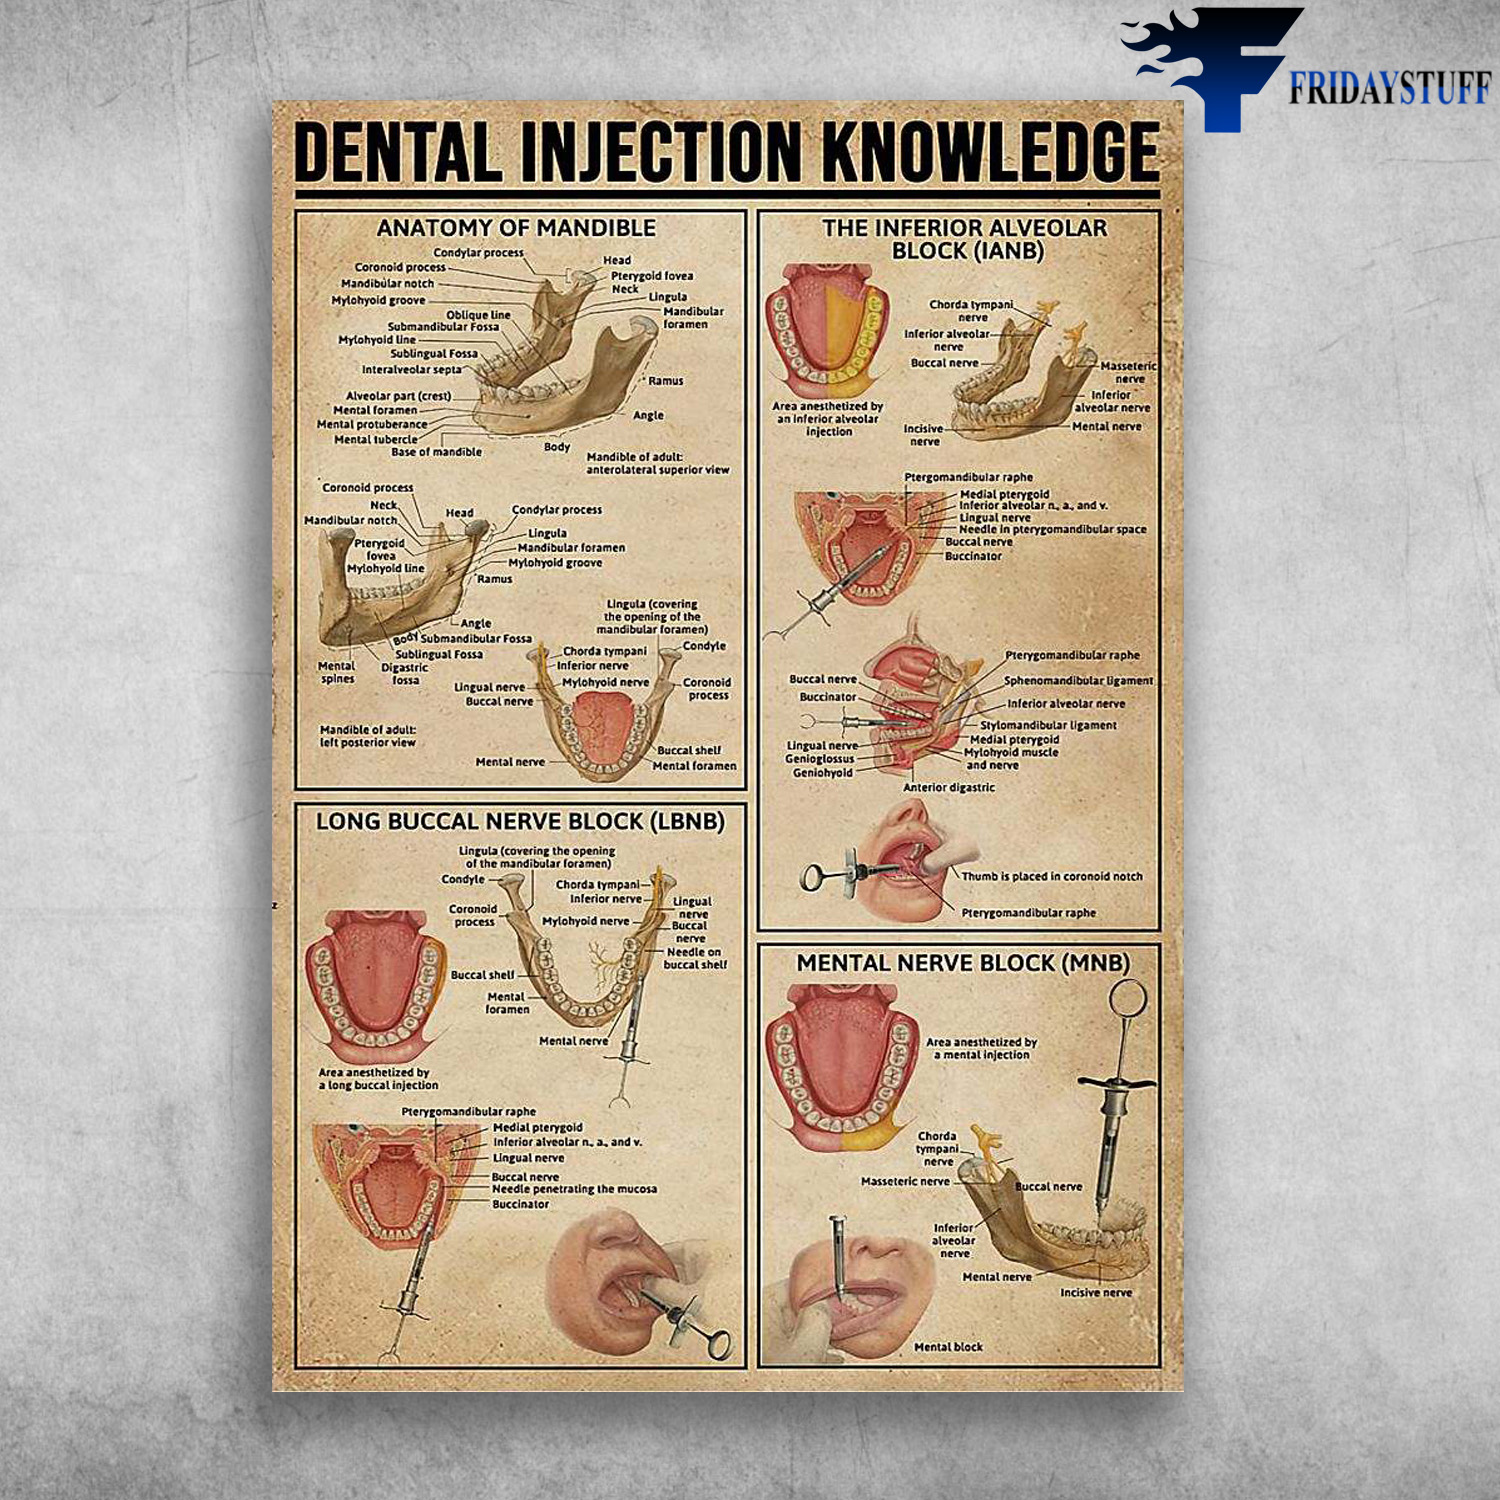 Dental Injection Knowledge - Anatomy Of Mandible, The Inferior Alveolar Block, Long Buccal Nerve Block, Mental Nerve Block